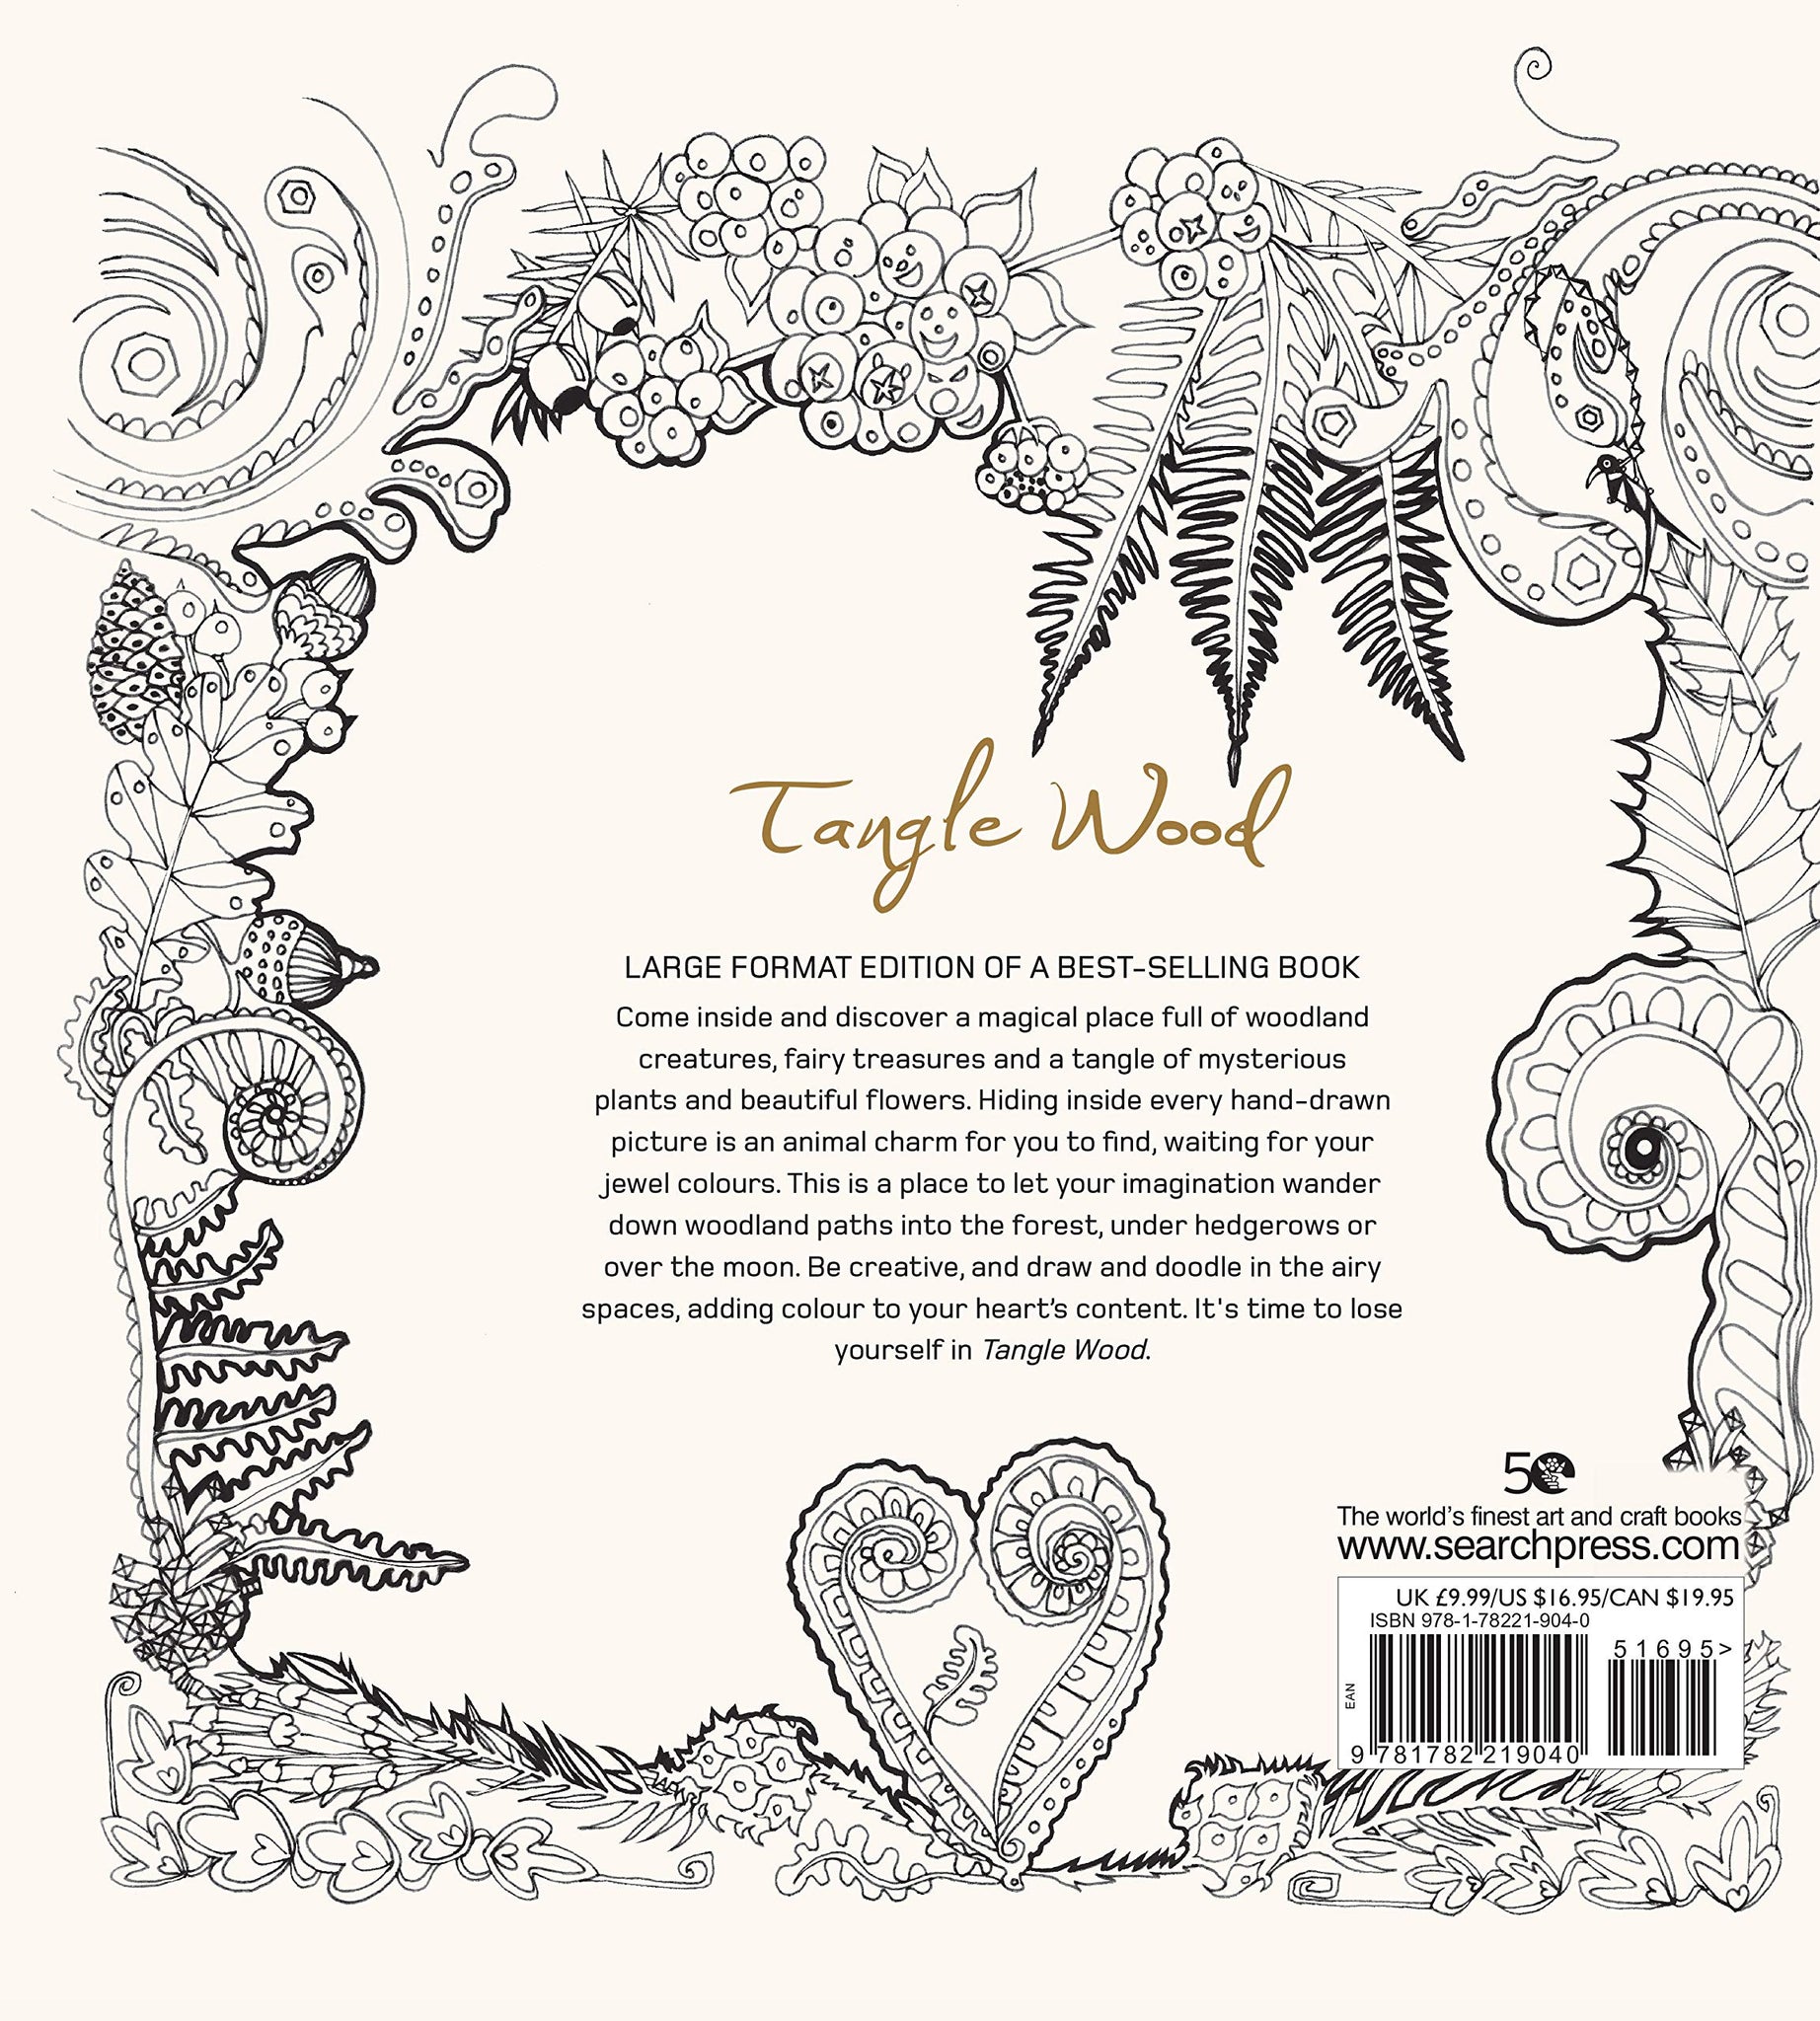 Search Press Books - Tangle Wood Colouring Book - Large Format